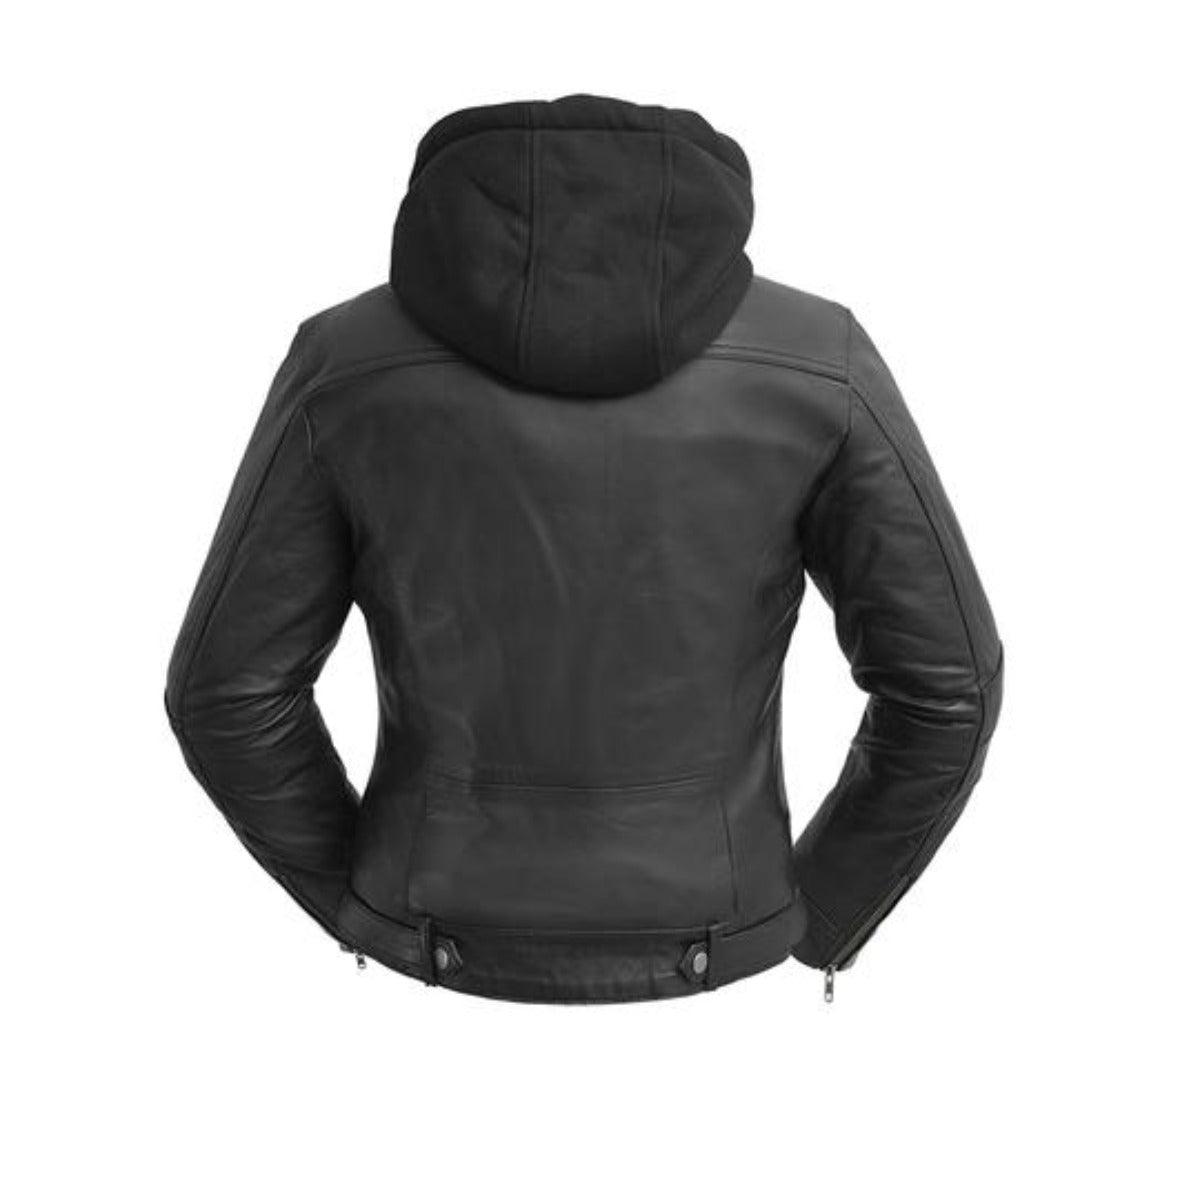 First Manufacturing April - Women's Leather Jacket, Black - American Legend Rider